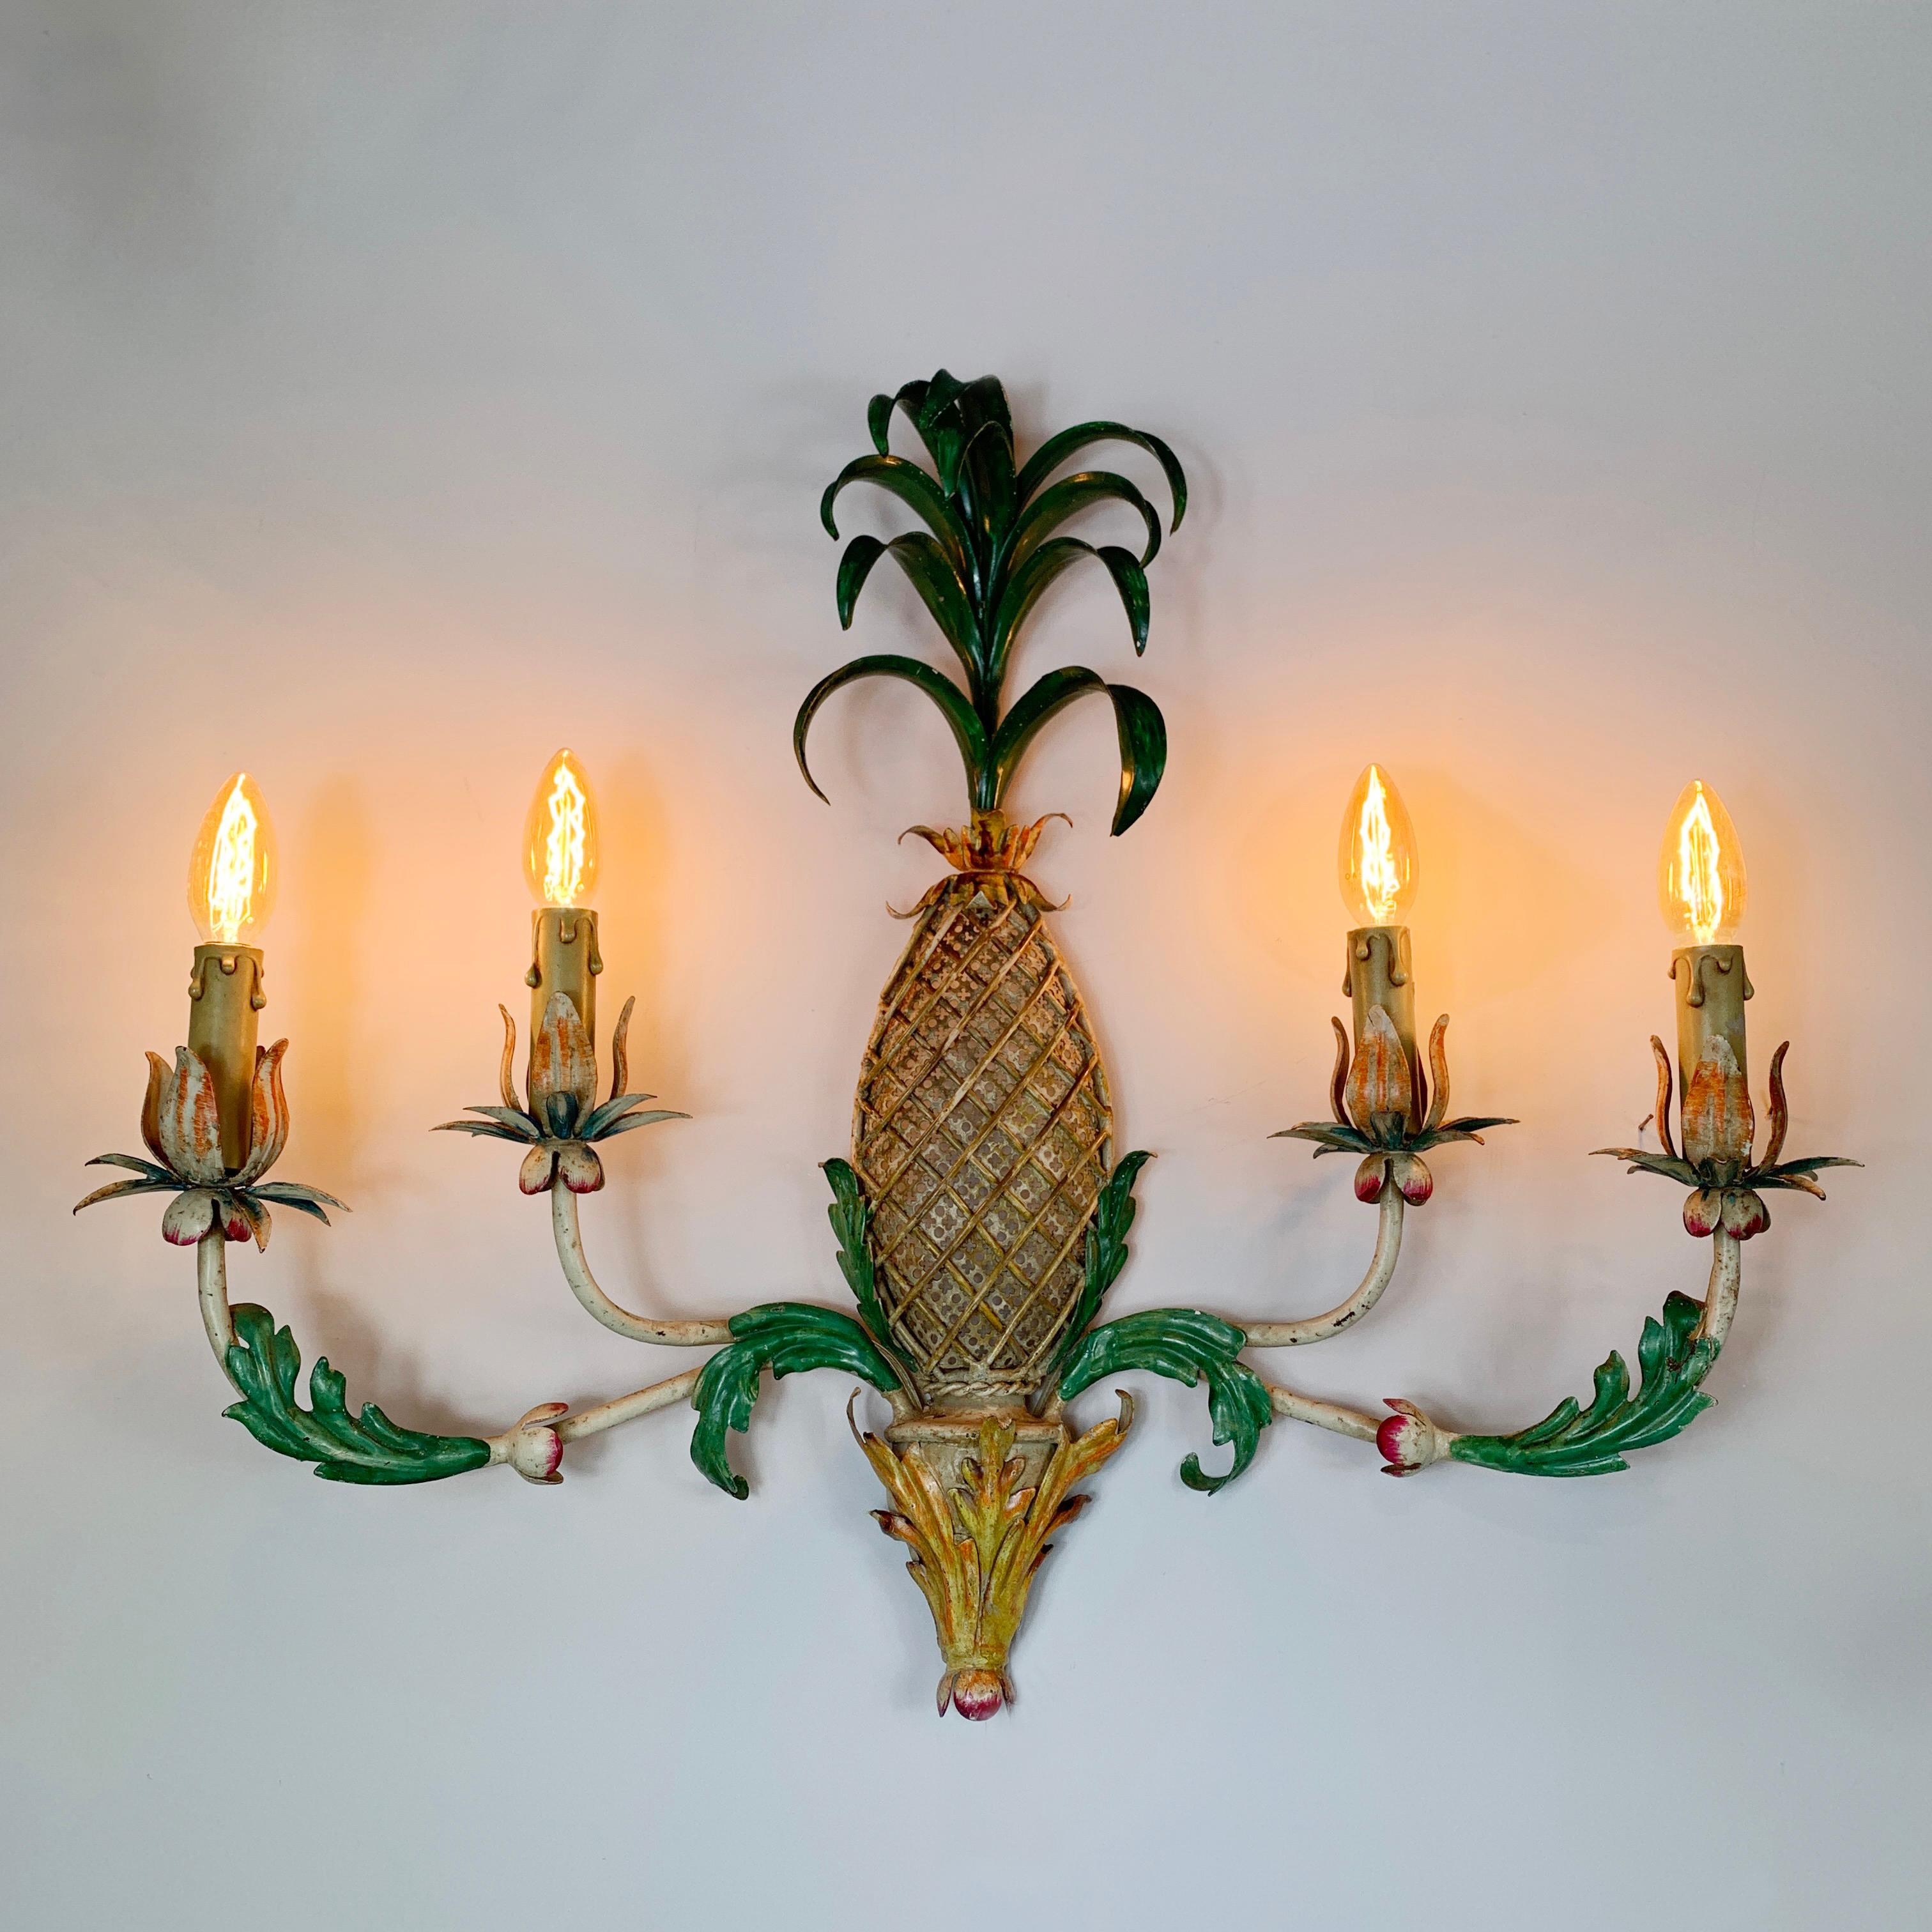 A large 1940's tole pineapple wall light, hand painted, French. This beautiful and unusually decorative light, has a pierced metal work central pineapple, with four branched arms extending outward which house the bulb holders, which in turn are